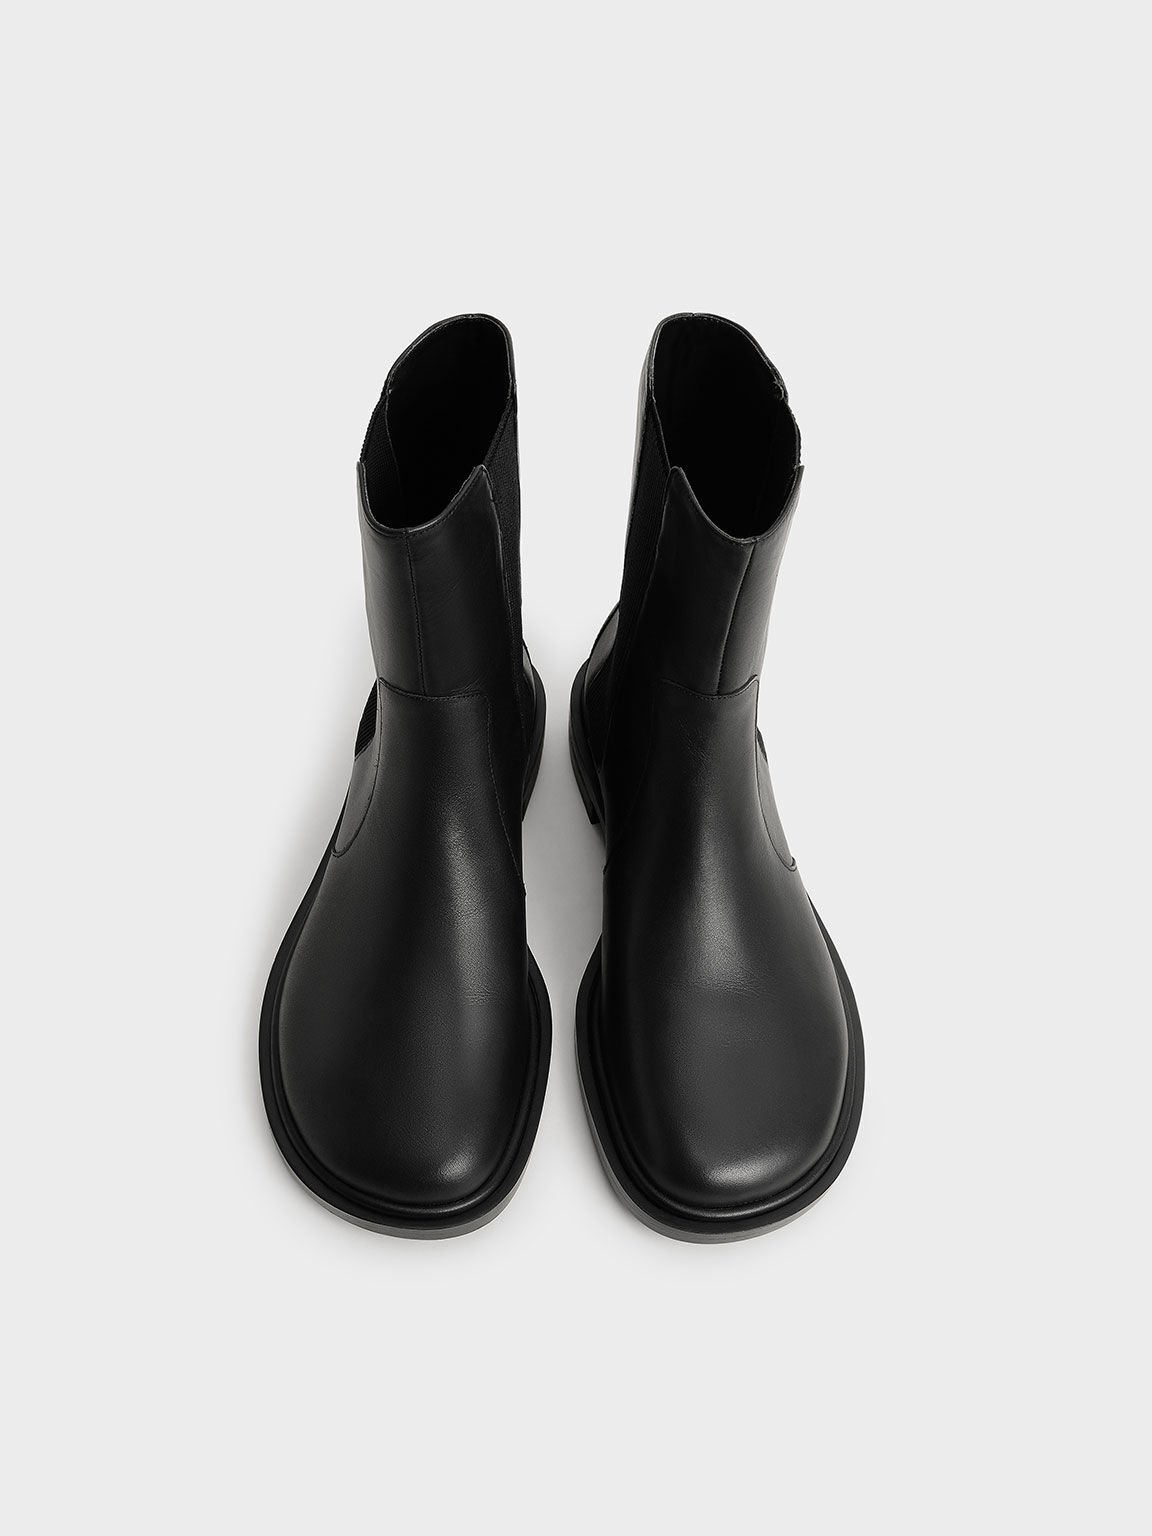 Leather Round-Toe Chelsea Boots, Black, hi-res